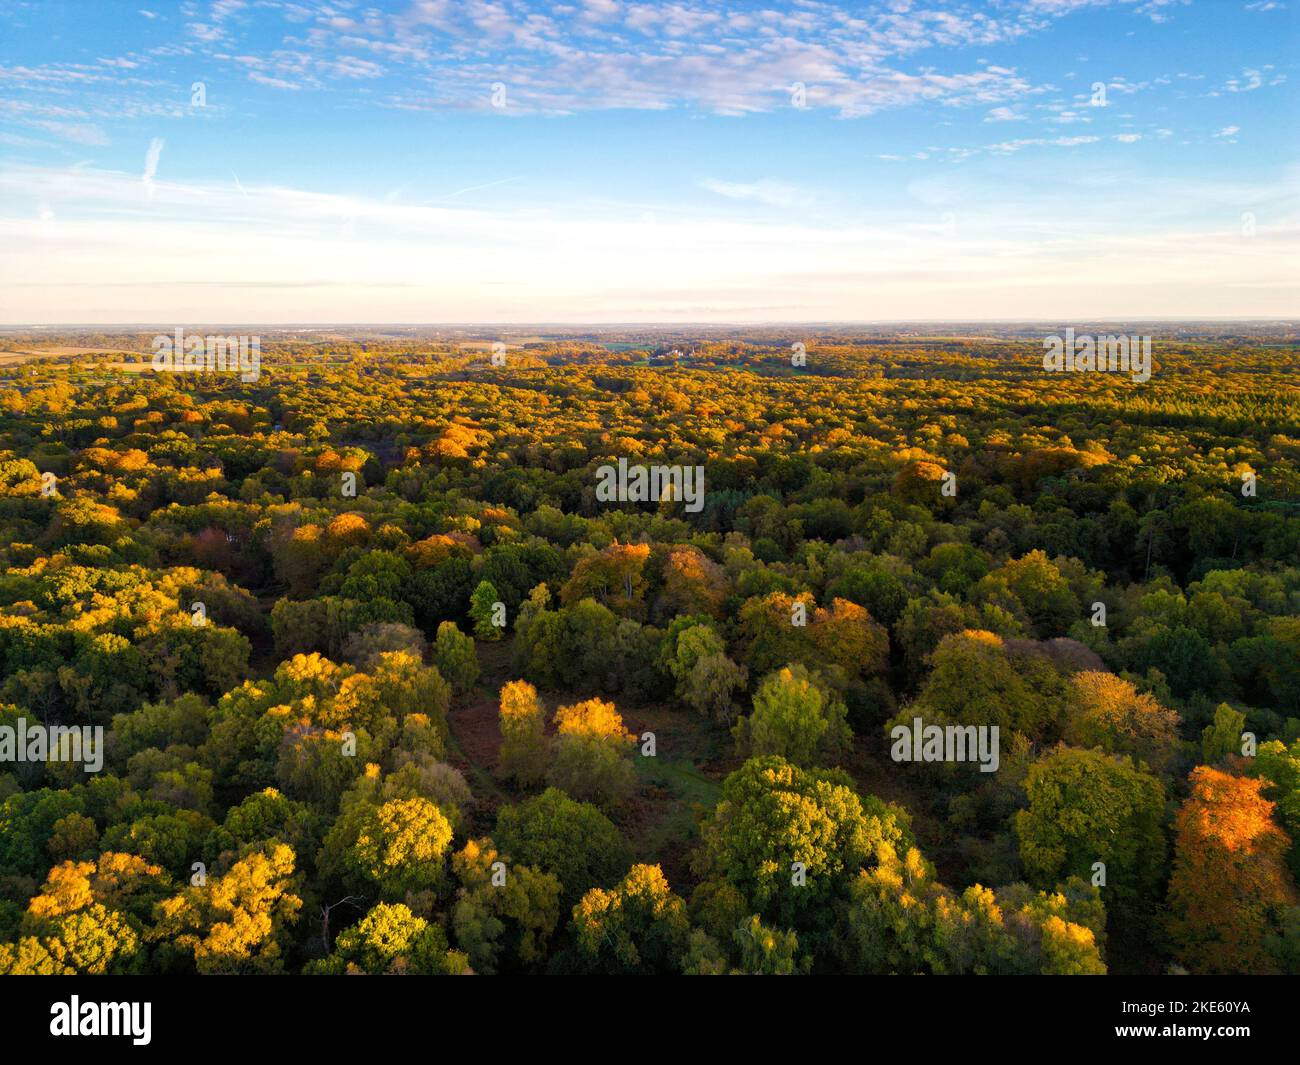 An aerial view of autumn woodlands in Ashridge, England Stock Photo